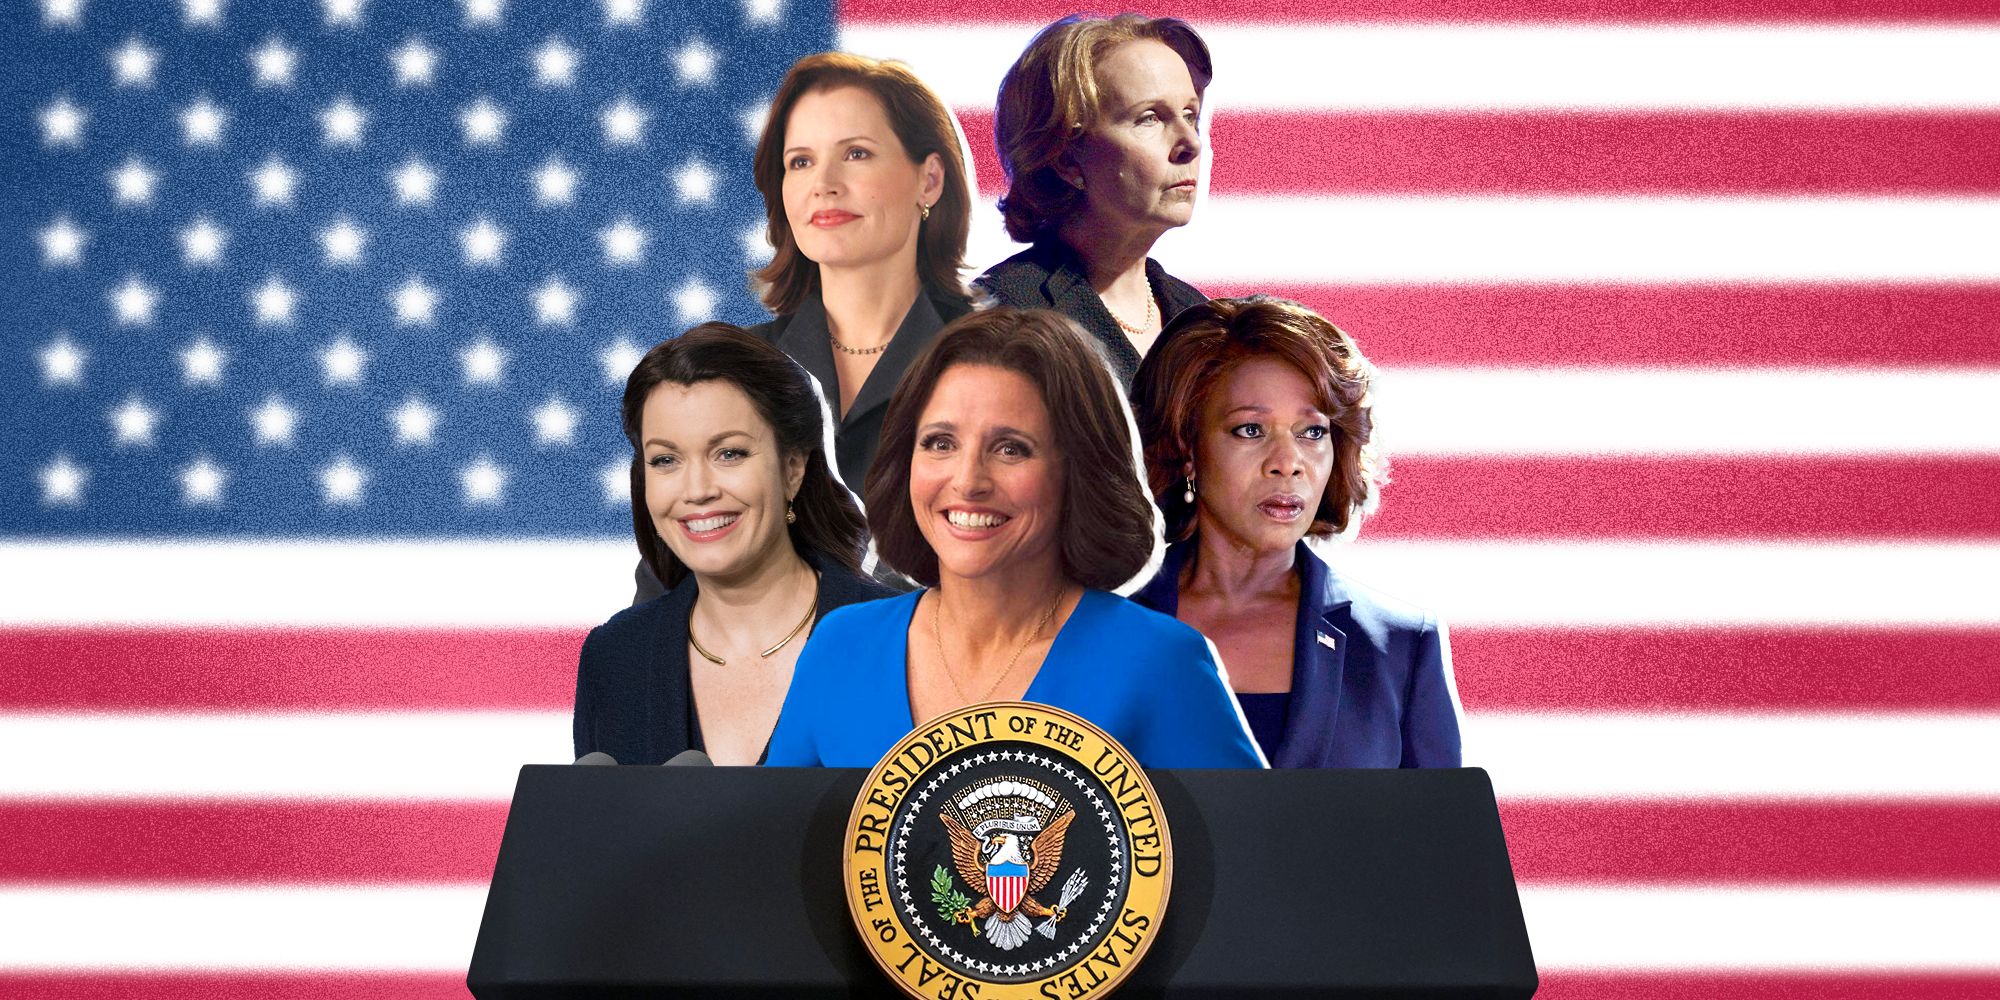 Who Will Be Our First Woman President? - Women Presidents in TV